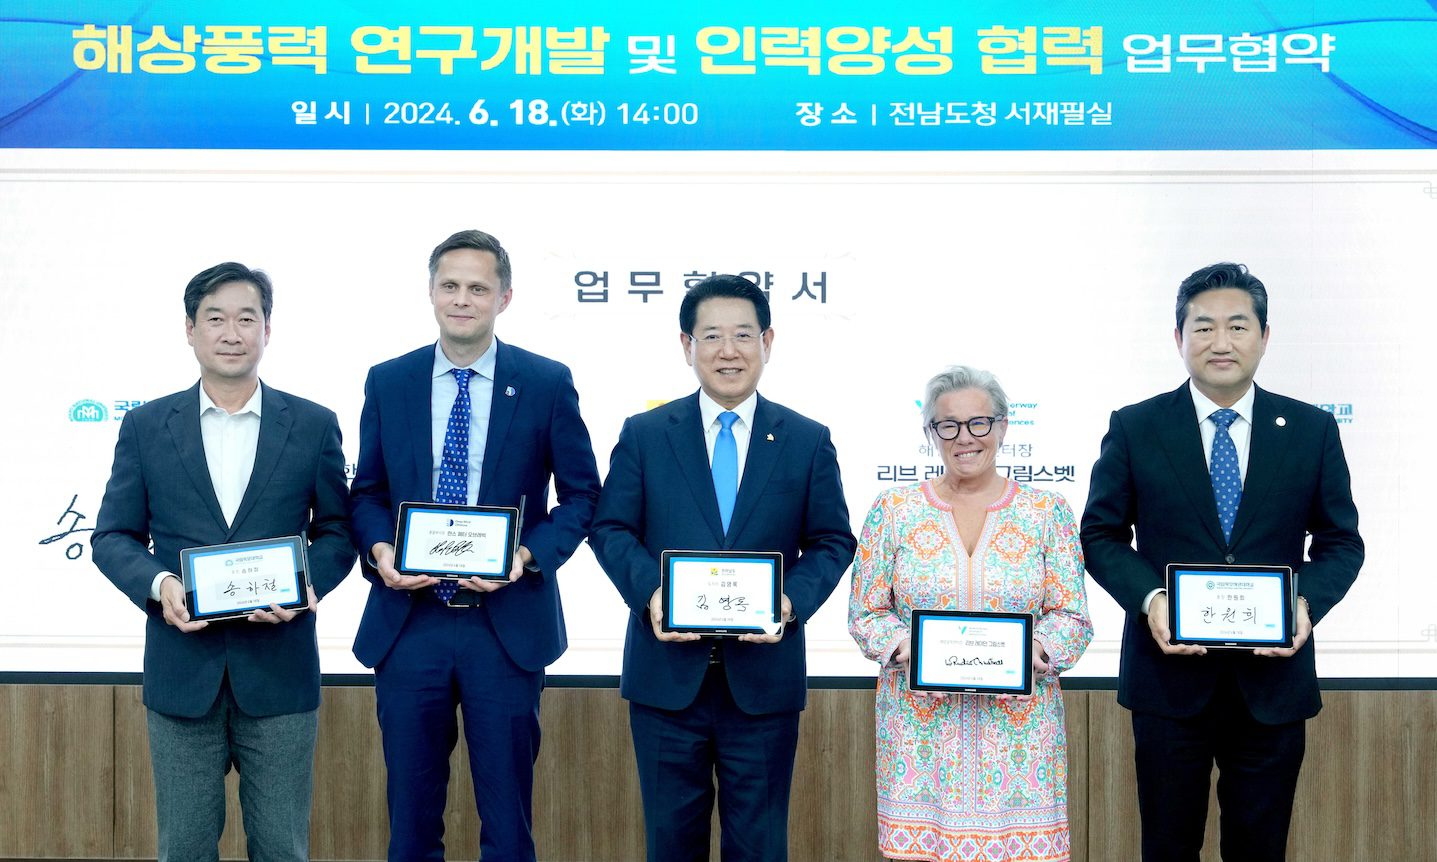 On the picture, from left: Song Ha-cheol, President of Mokpo National University; Hans Petter Ovrevik, Chief Commercial Officer of Deep Wind Offshore; Kim Young-rok, Governor of Jeollanam-do; Liv Reidun Grimstvedt, Head for Safety at Sea at HVL; and Han Won-hee, President of Mokpo Maritime University.